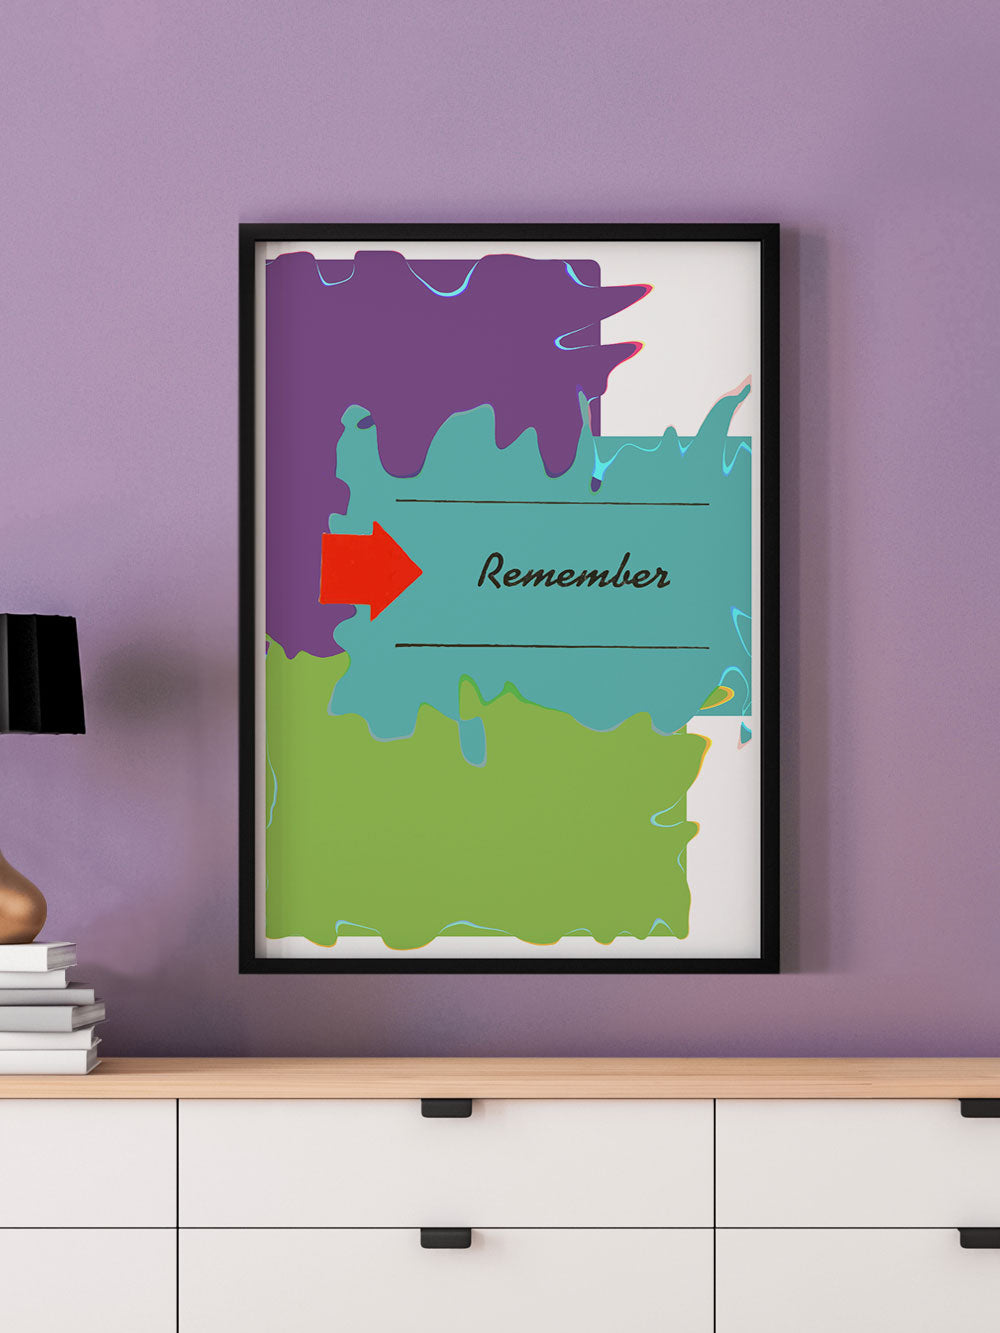 Remember Whats Coming Minimal Art Print in a frame on a wall